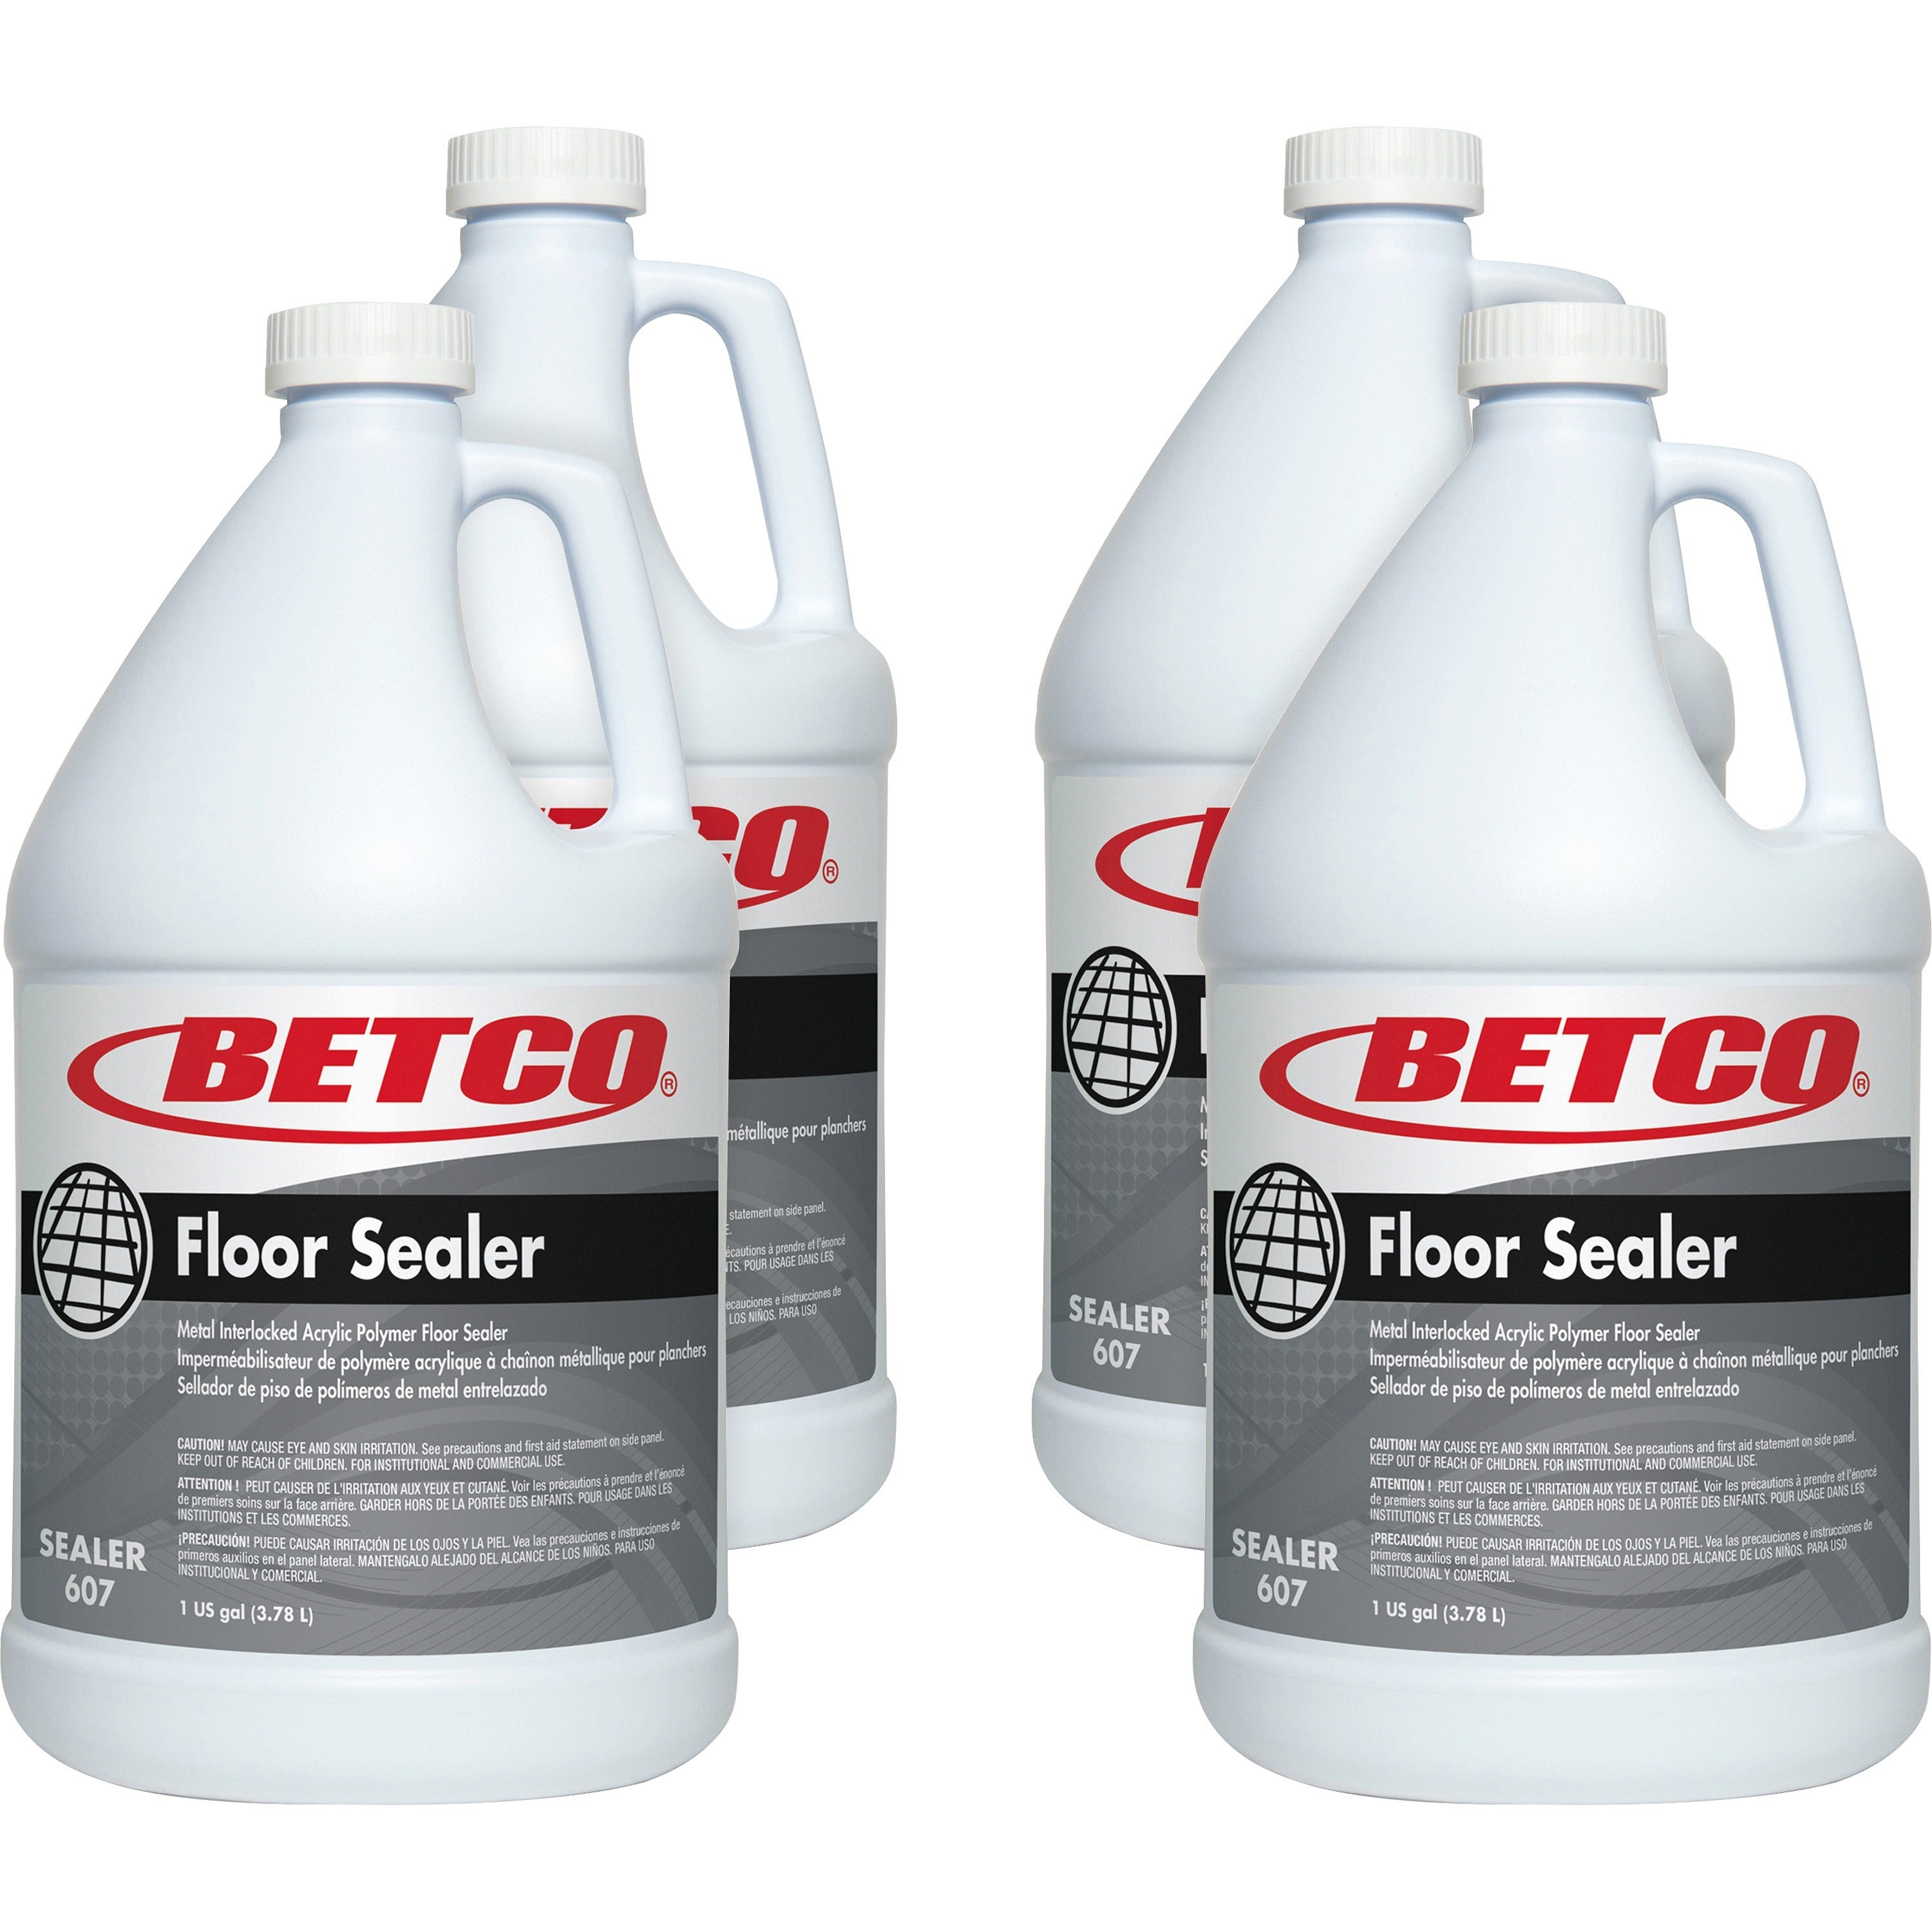 Betco Acrylic Floor Sealer - 128 fl oz (4 quart) - Characteristic Scent - 4 / Carton - Durable, Detergent Resistant, Non-yellowing, Non-powdering, Water Based, Long Lasting - Clear, Milky White - 1